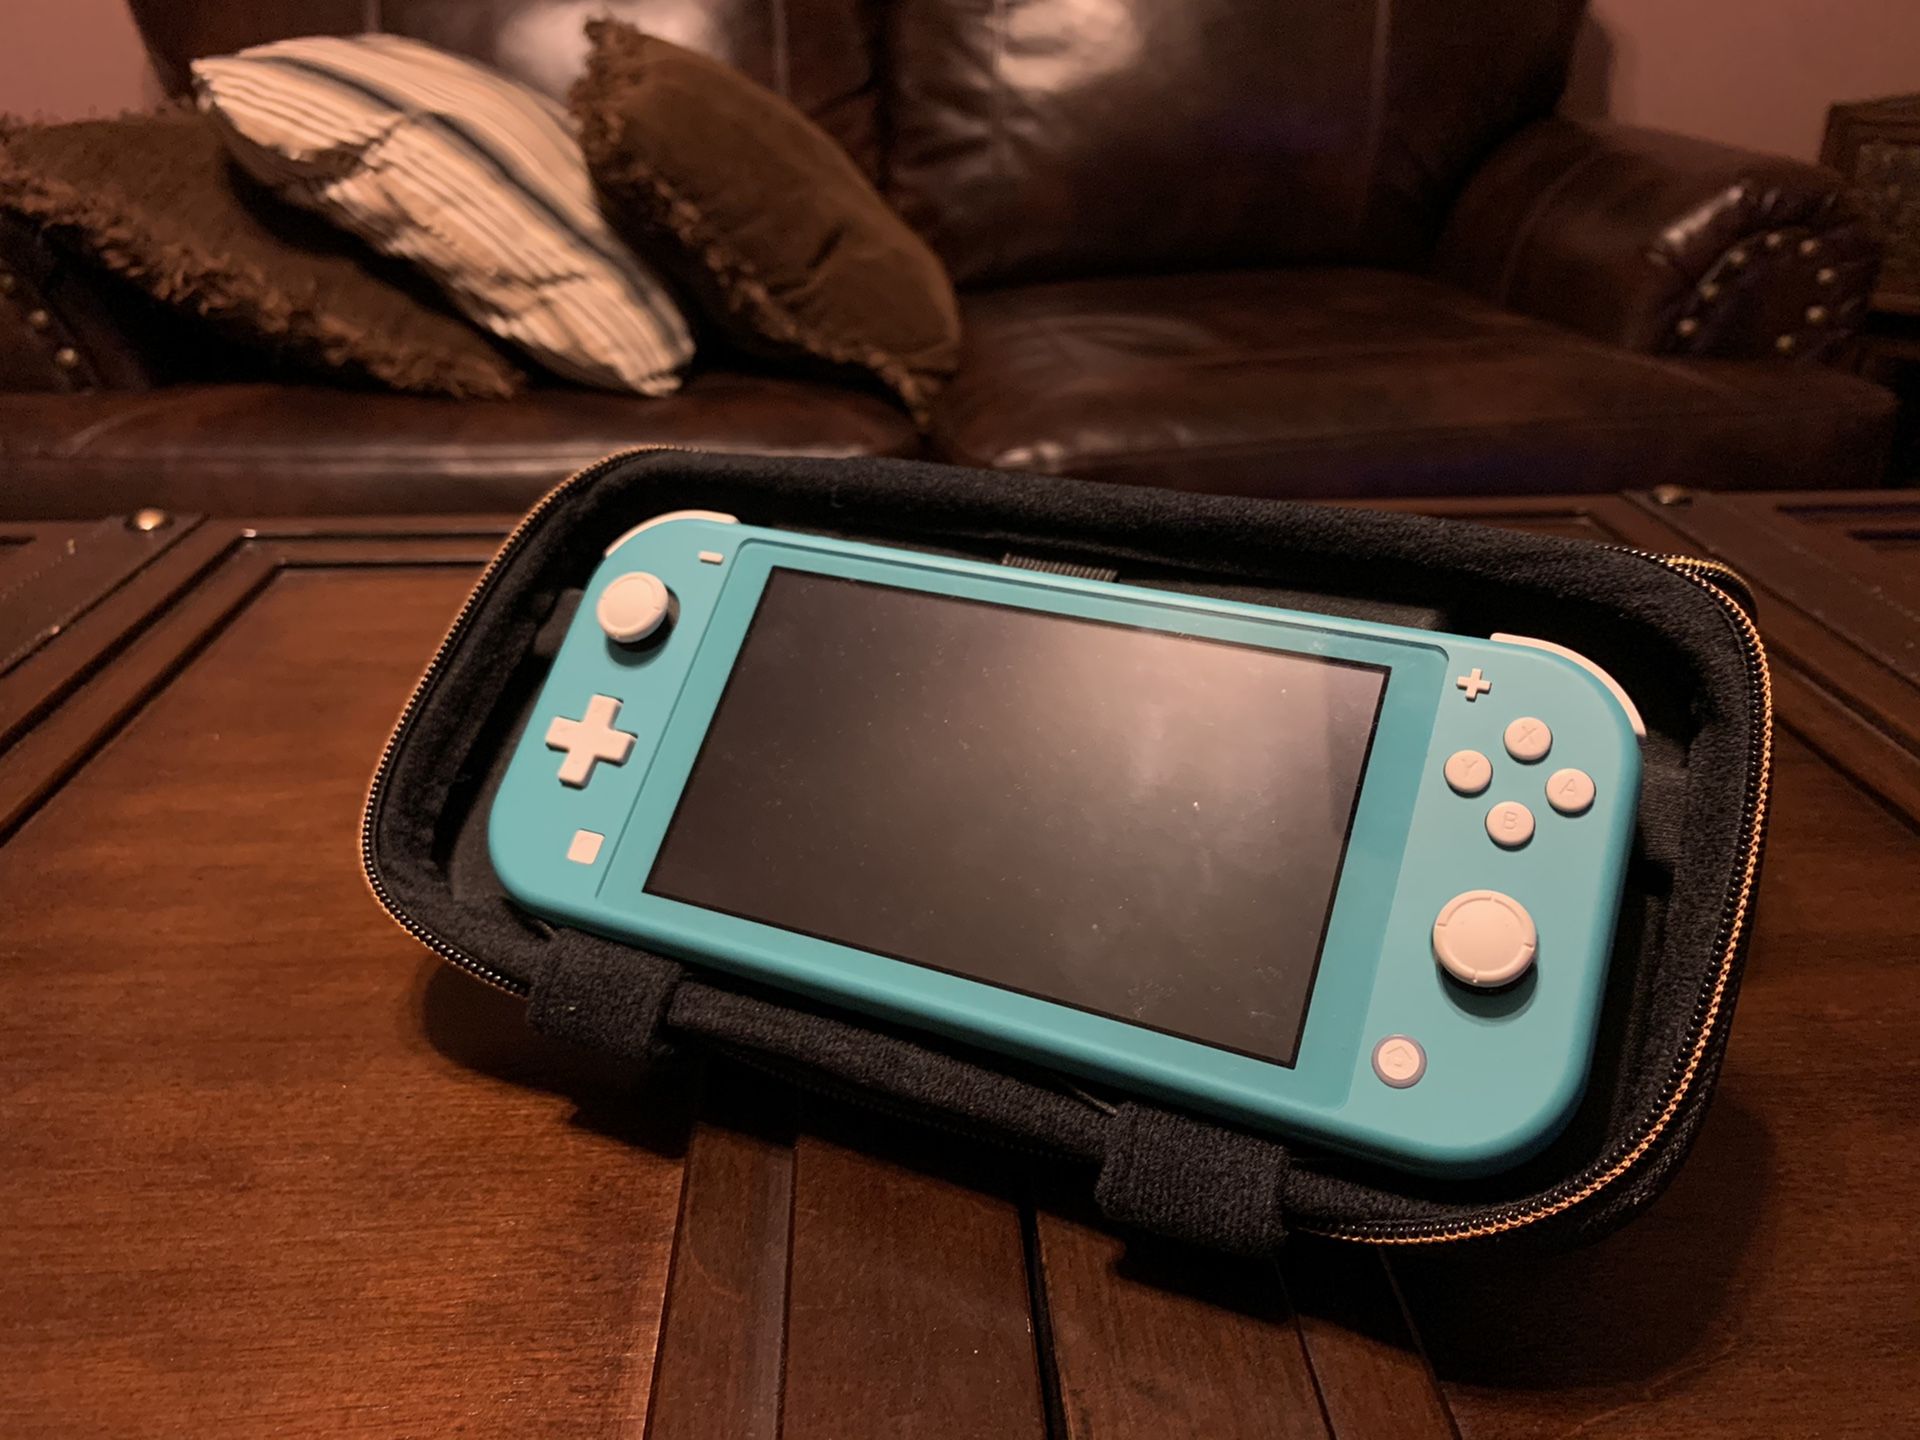 Teal Nintendo switch w/animal crossing game